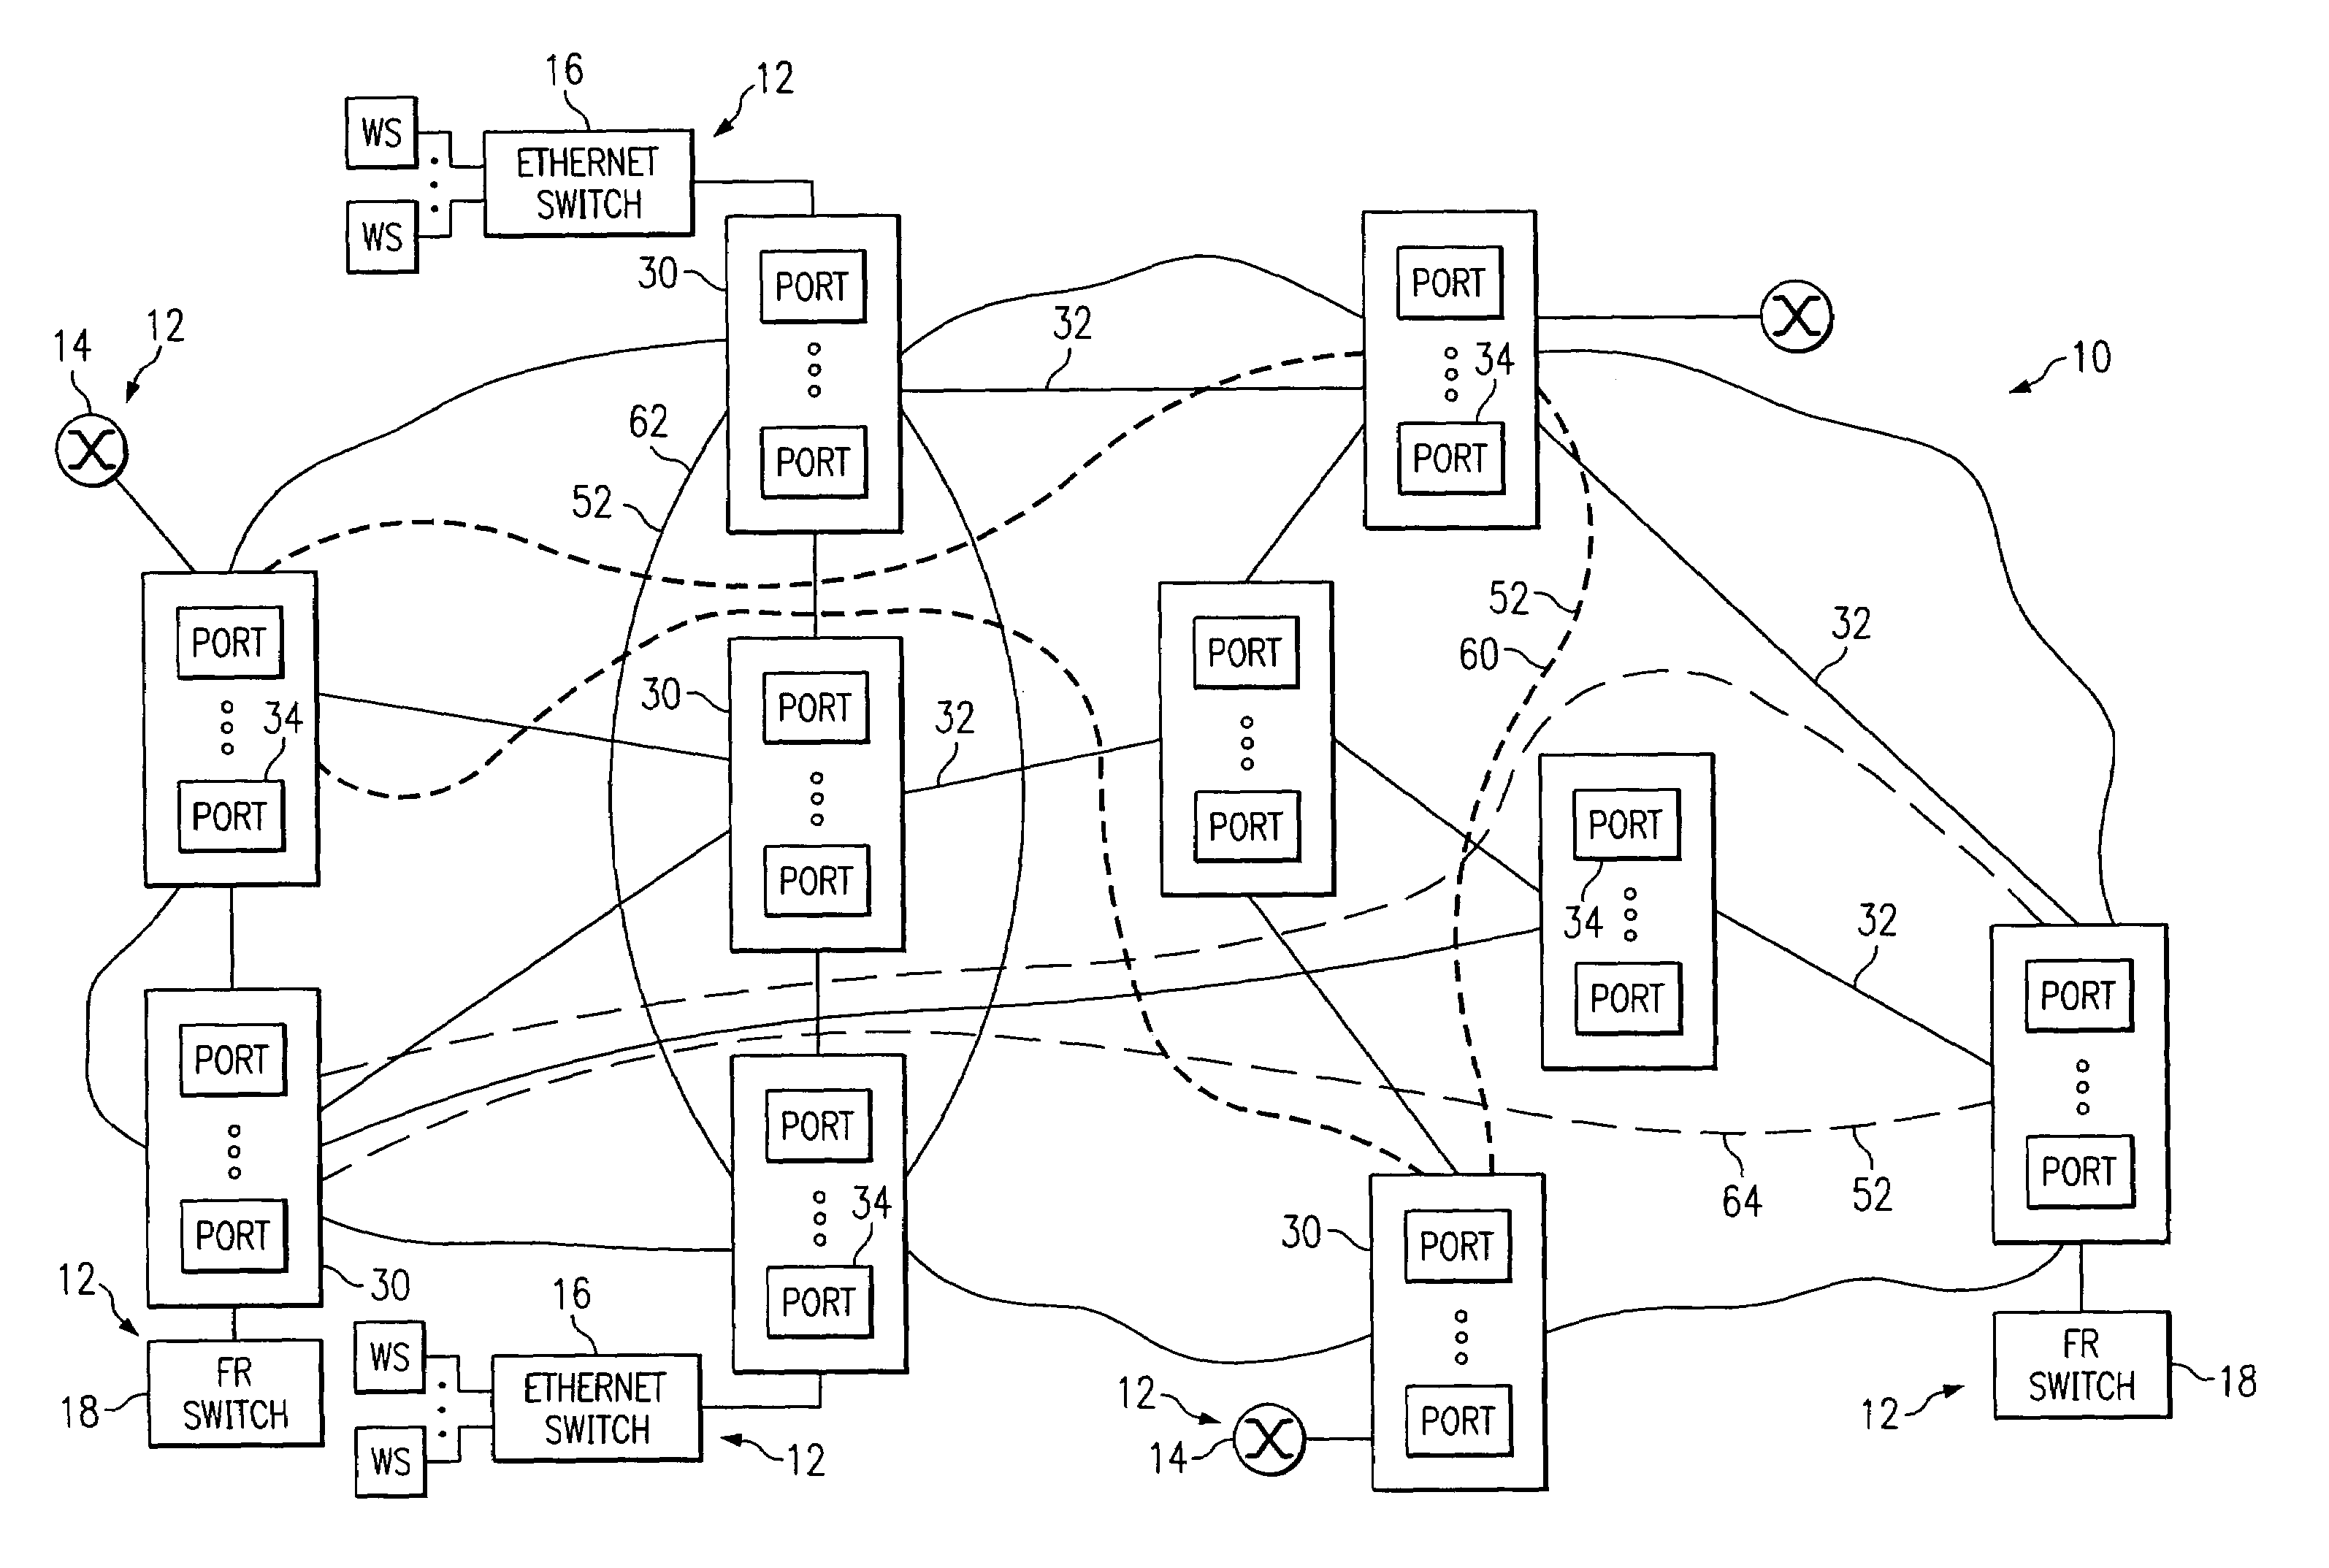 Transport network and method